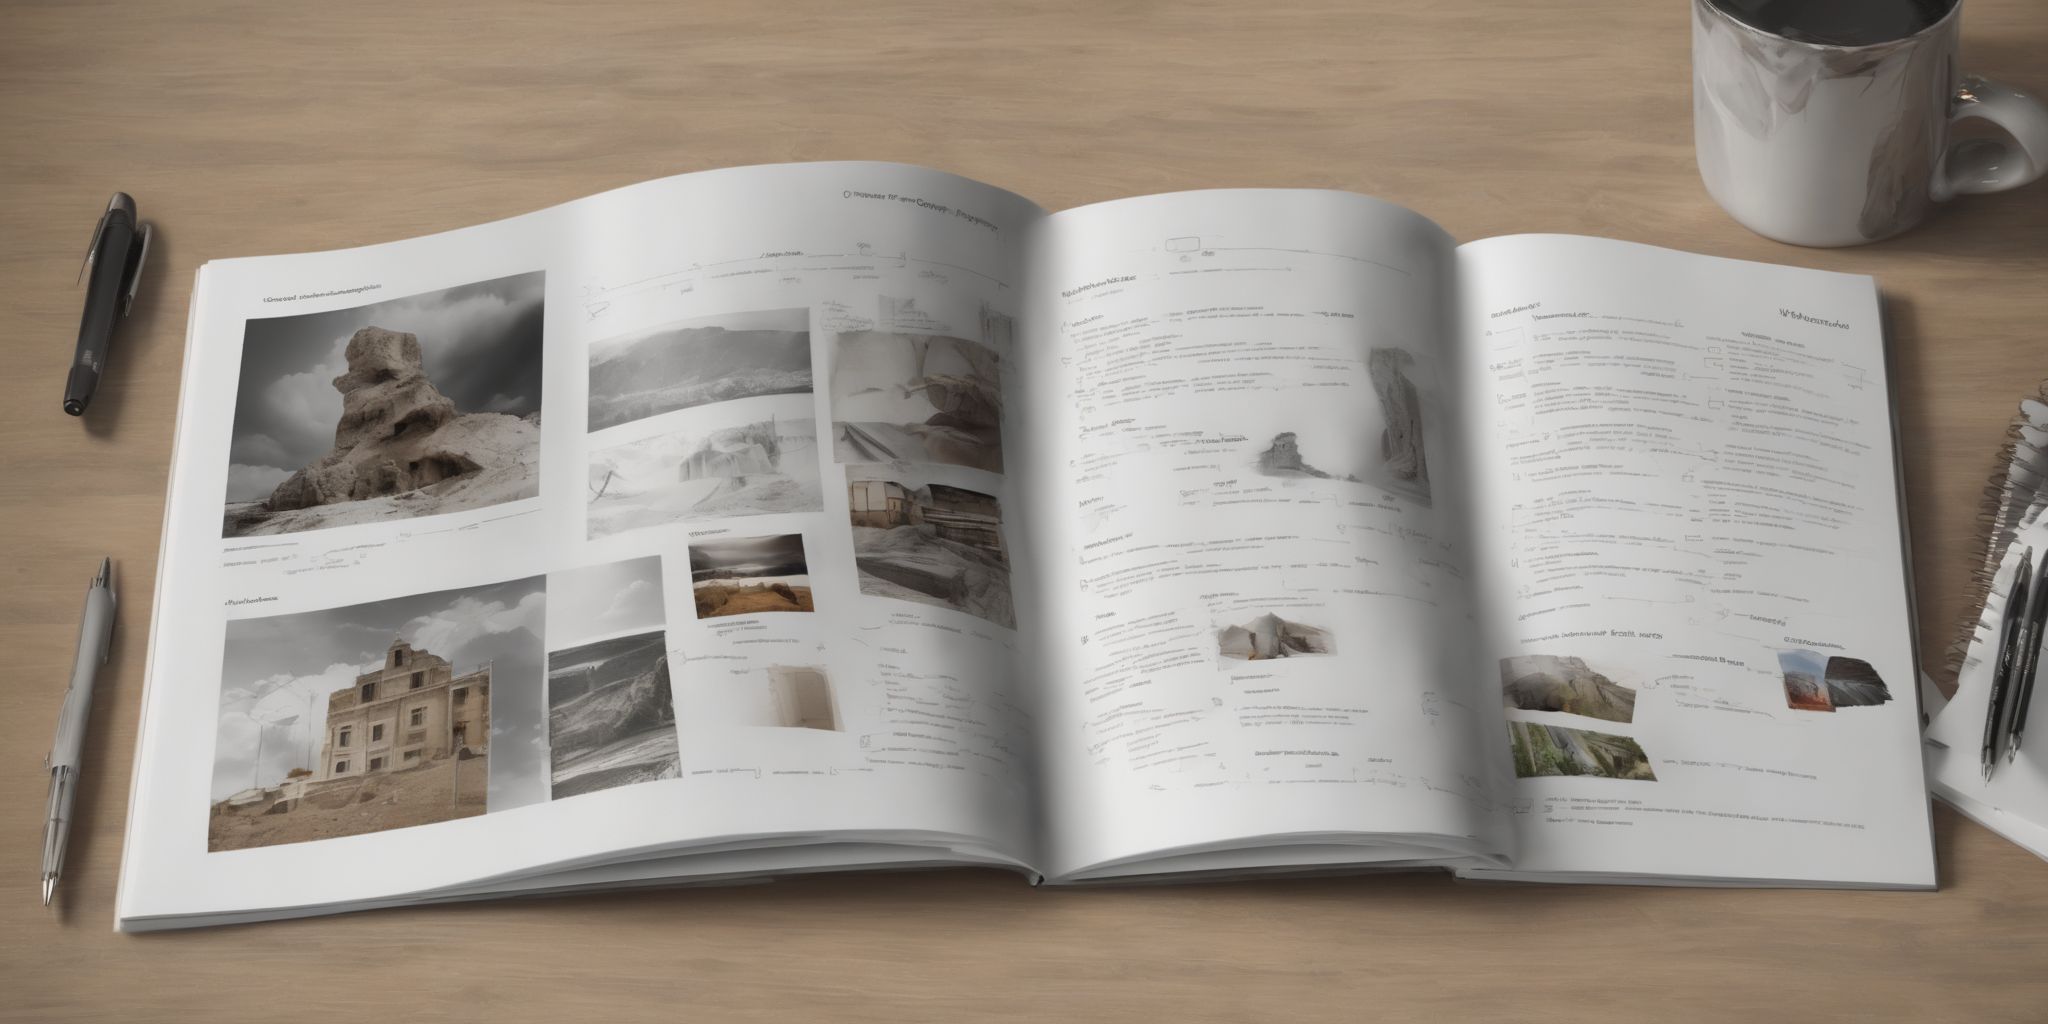 Workbook  in realistic, photographic style